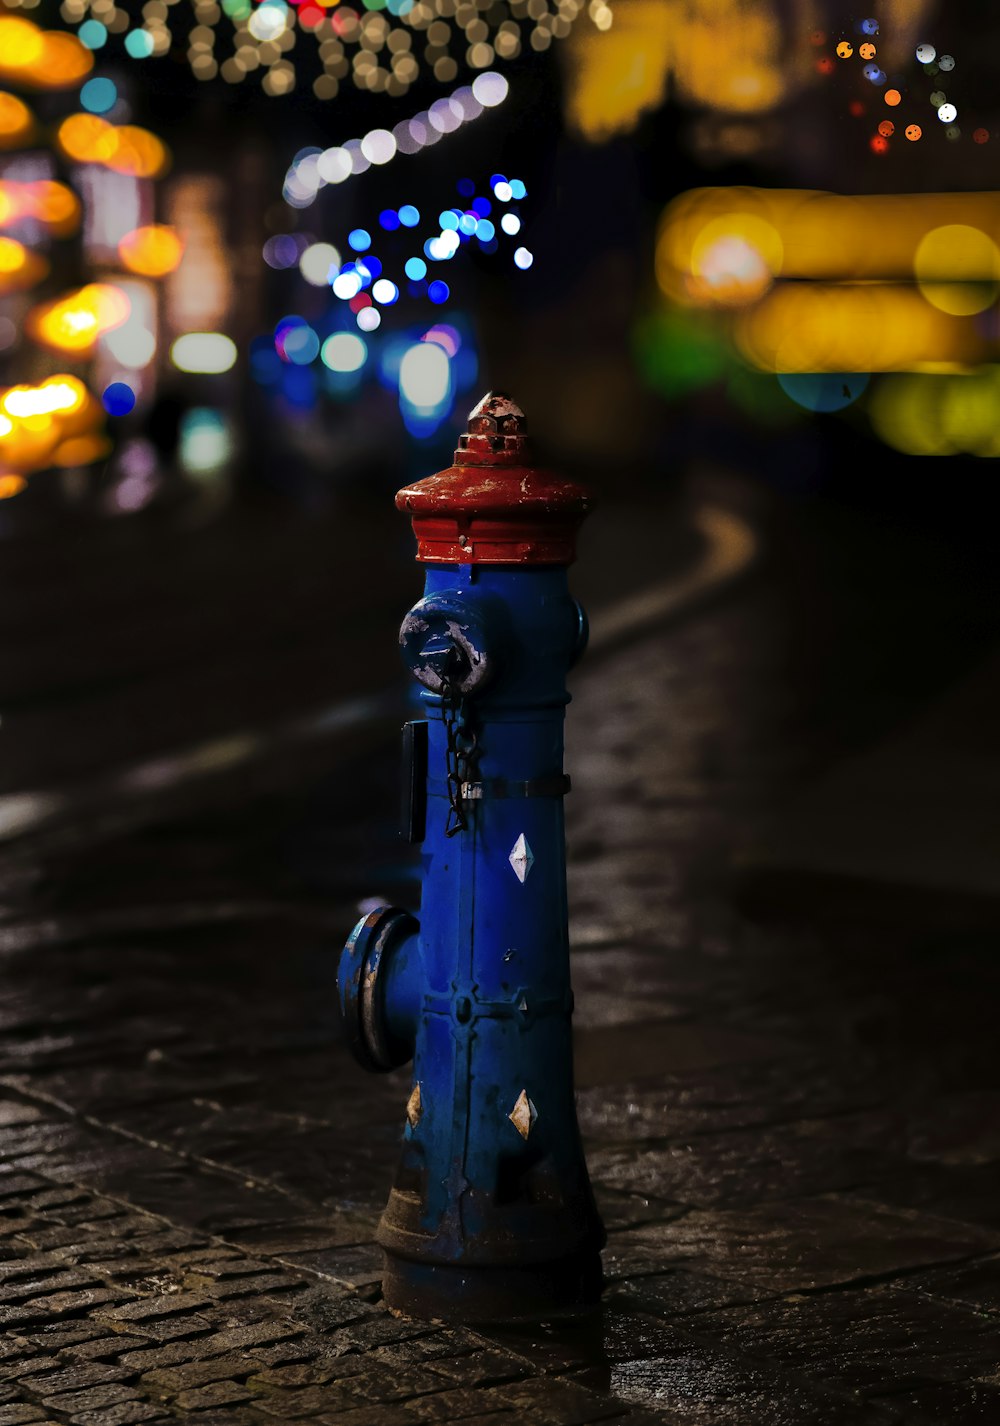 a blue fire hydrant sitting on the side of a road